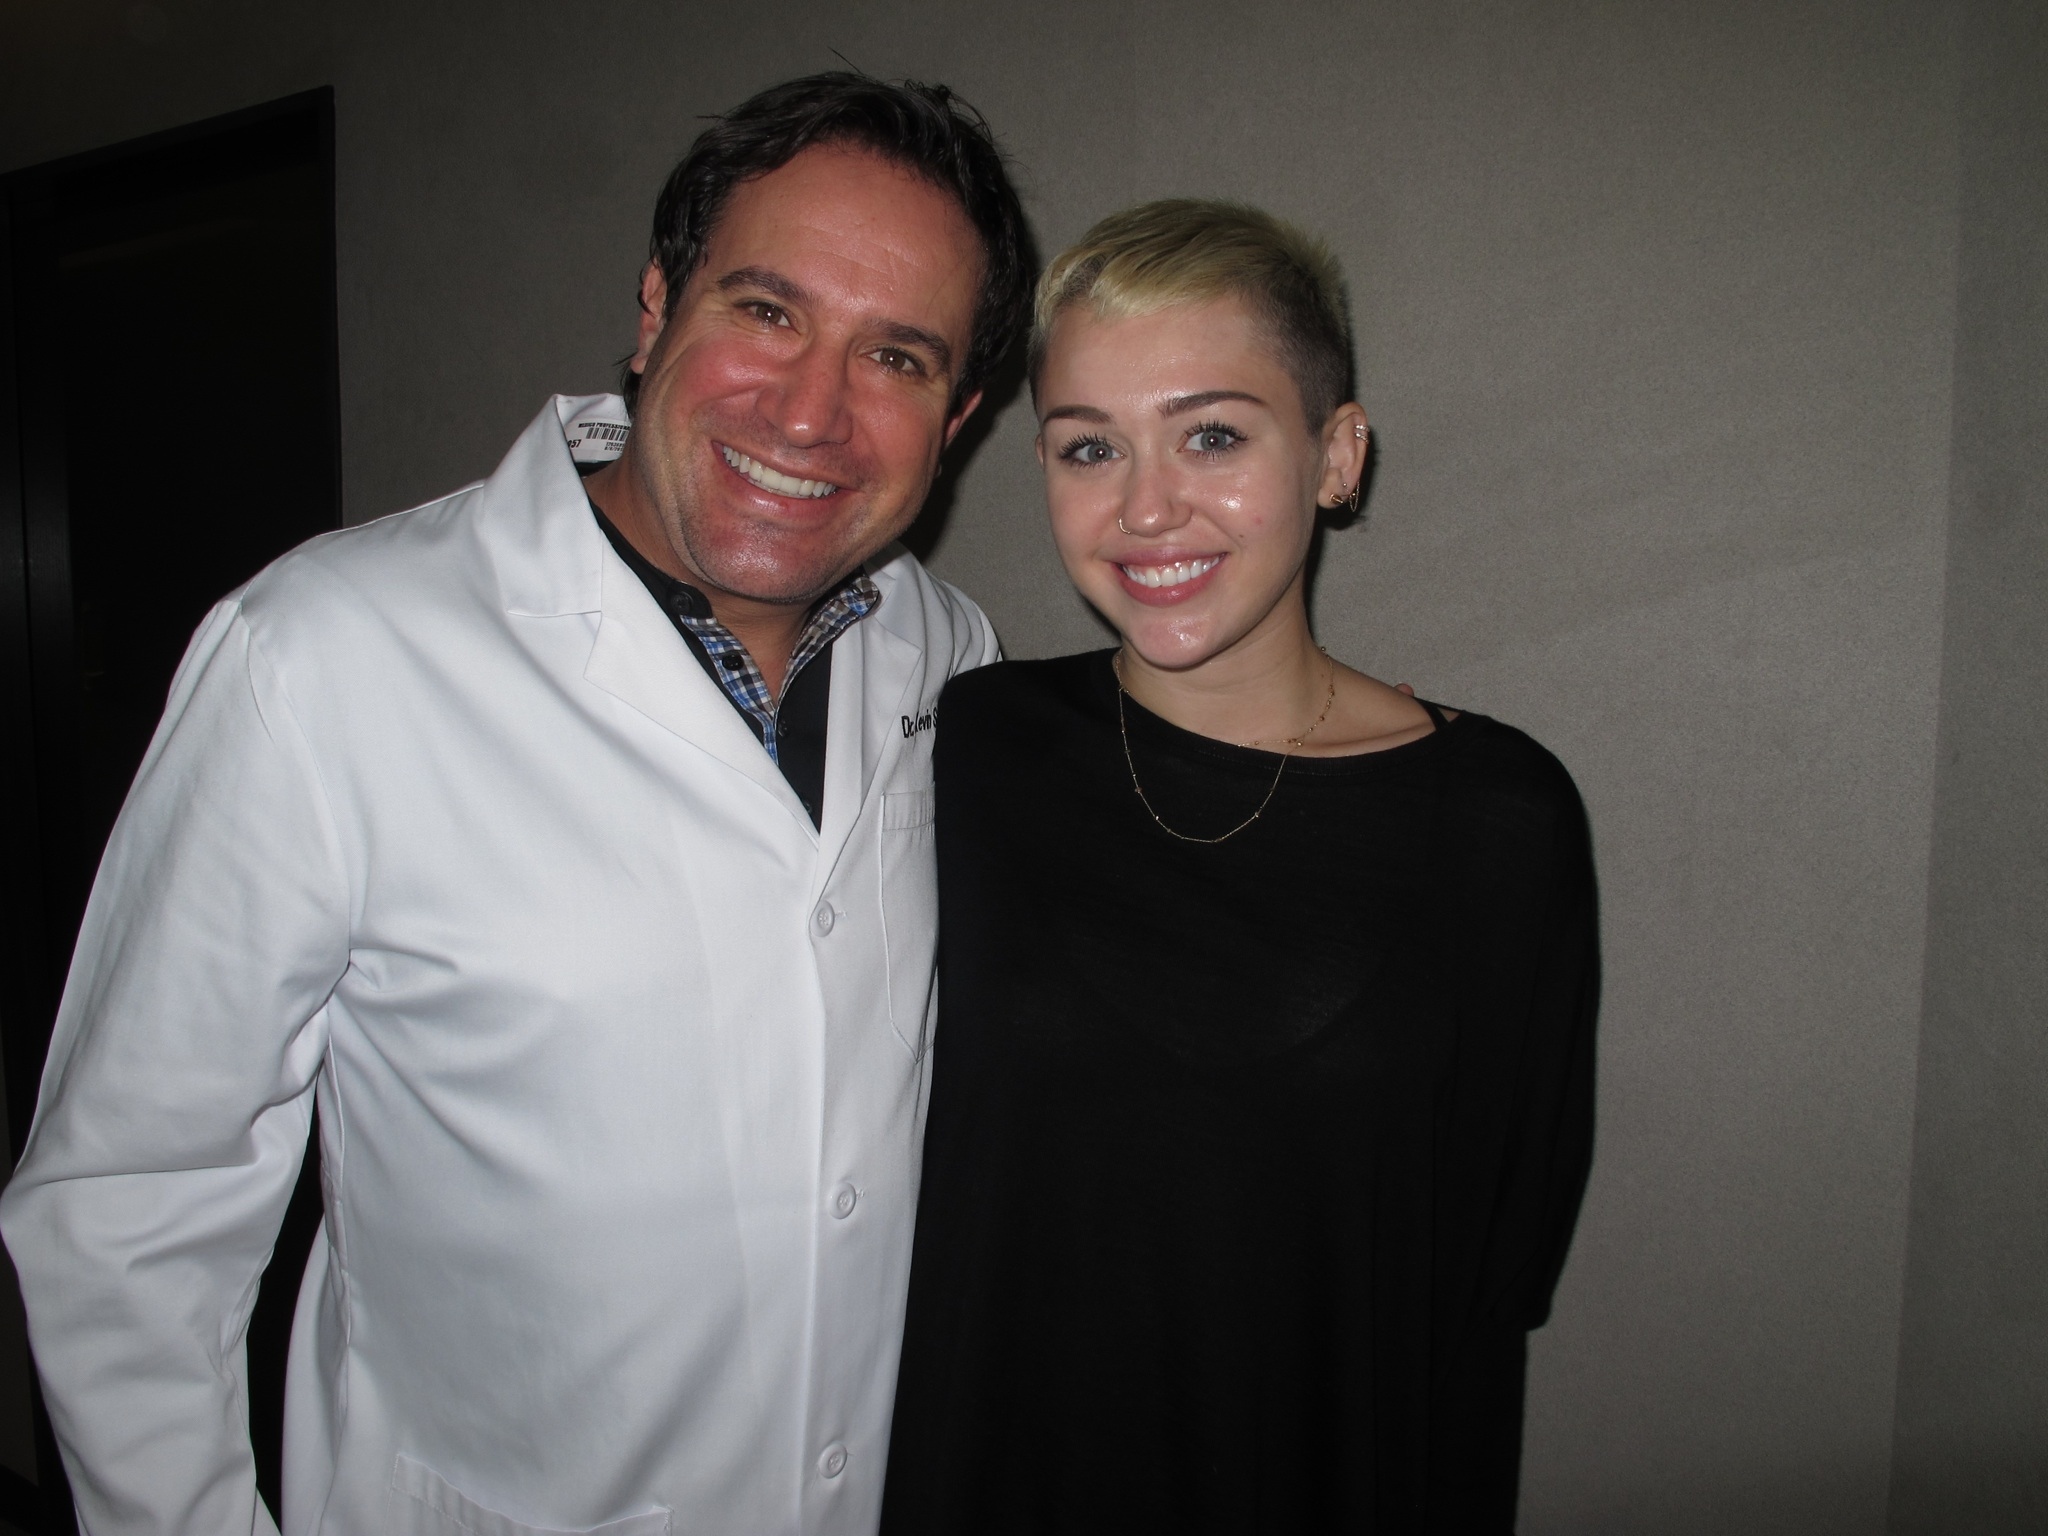 Dr. Kevin Sands with Miley Cyrus